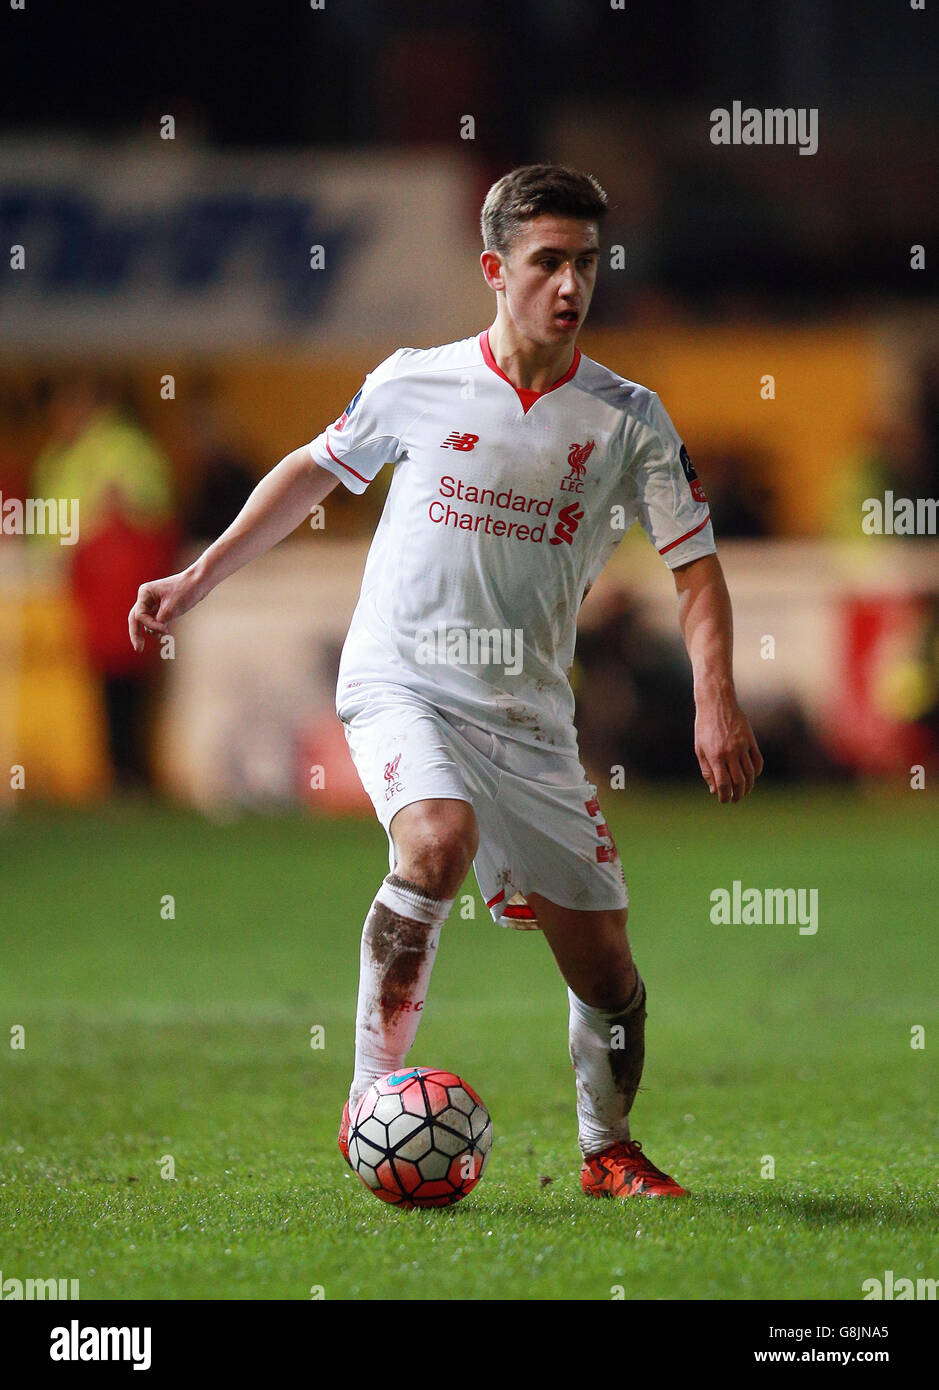 Exeter City v Liverpool - Emirates FA Cup - Third Round - St James Park. Liverpool's Cameron Brannagan during the Emirates FA Cup, third round match at St James Park, Exeter. Stock Photo